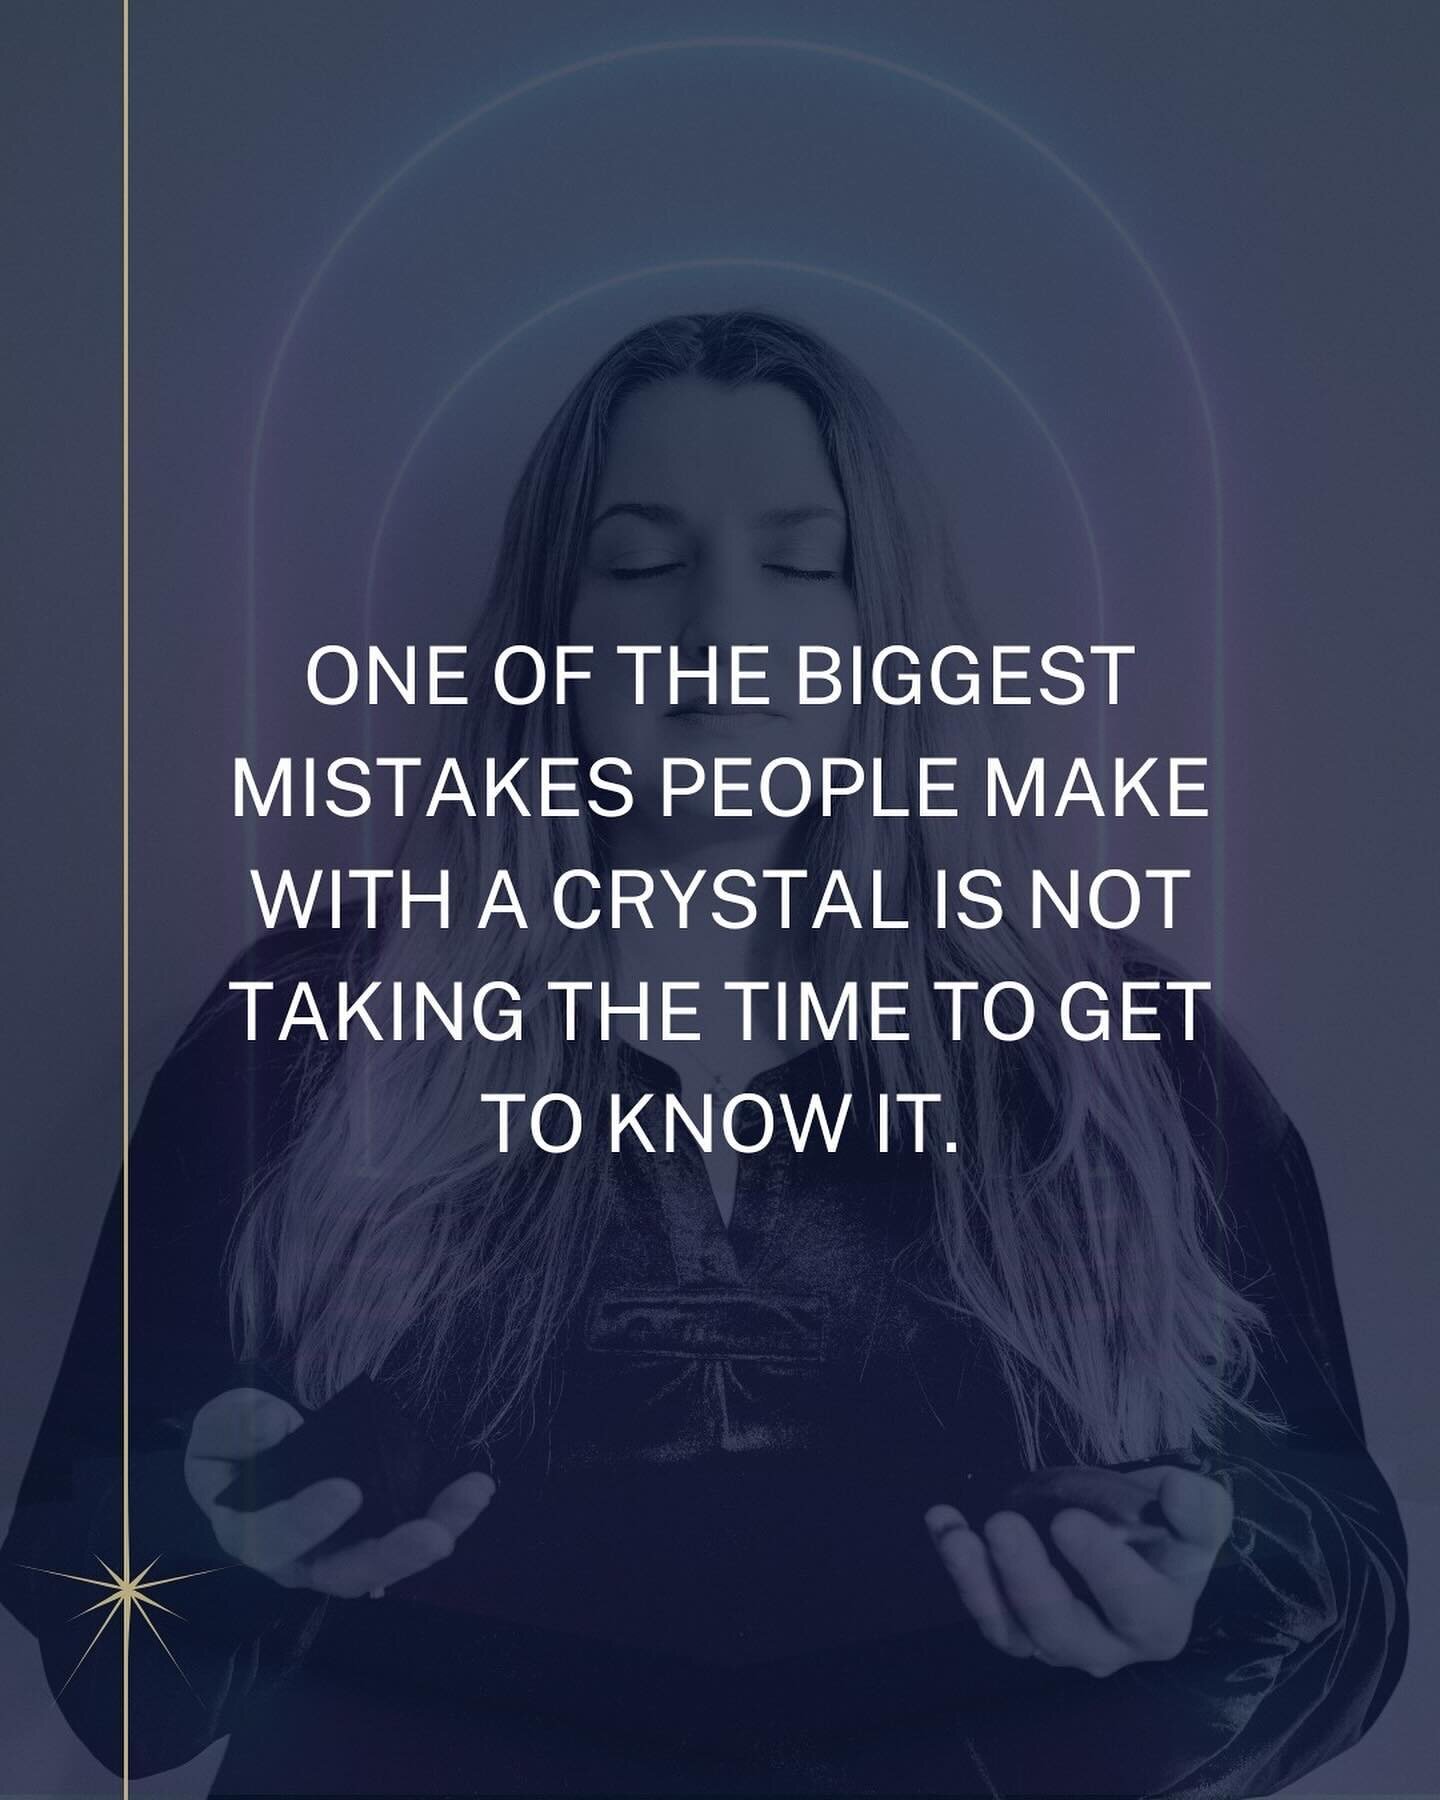 One of the biggest mistakes people make with a crystal is not taking the time to get to know it.
⠀⠀⠀⠀⠀⠀⠀⠀⠀
Every crystal has a spirit, and a song they sing to your soul.
⠀⠀⠀⠀⠀⠀⠀⠀⠀
If you can&rsquo;t take the time to get to know a crystal, how will yo